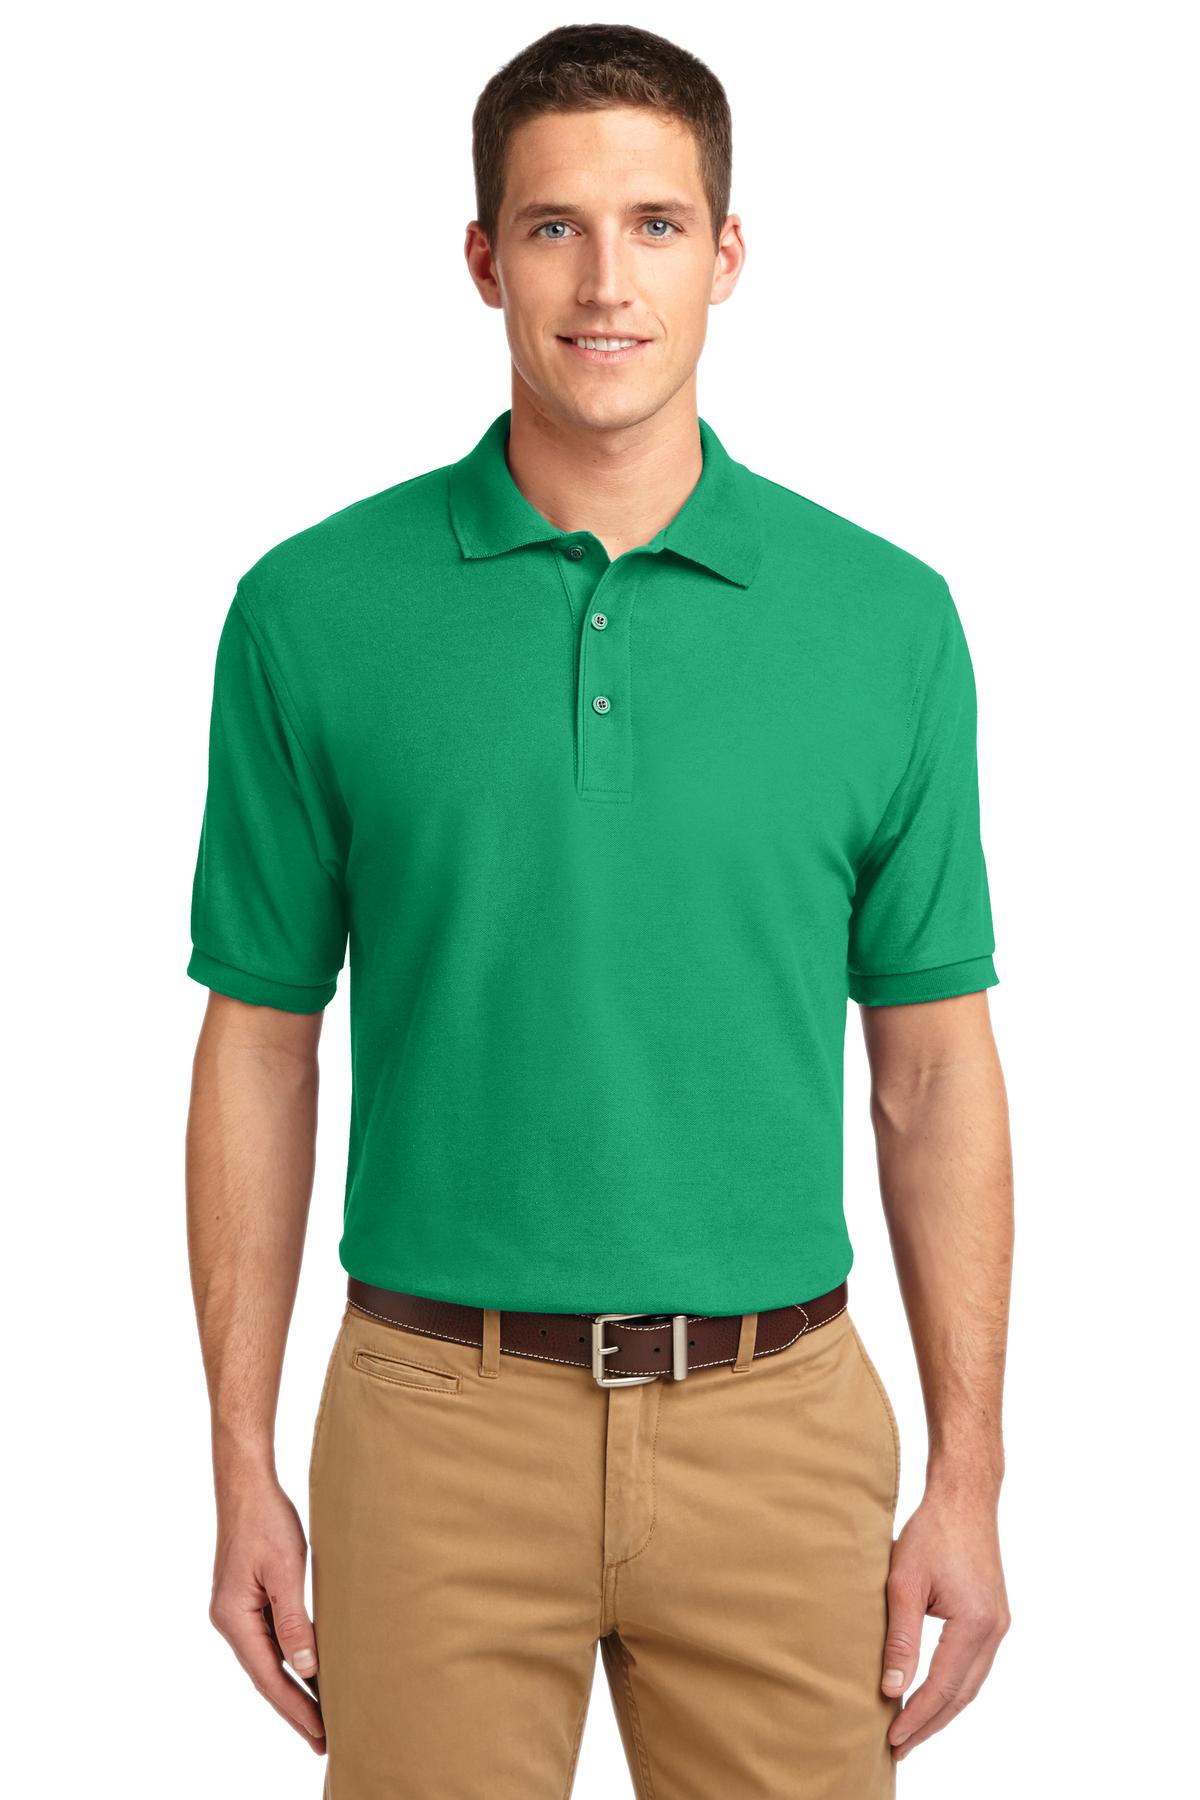 Port Authority K500 Silk Touch Polo - Mint Green - XS